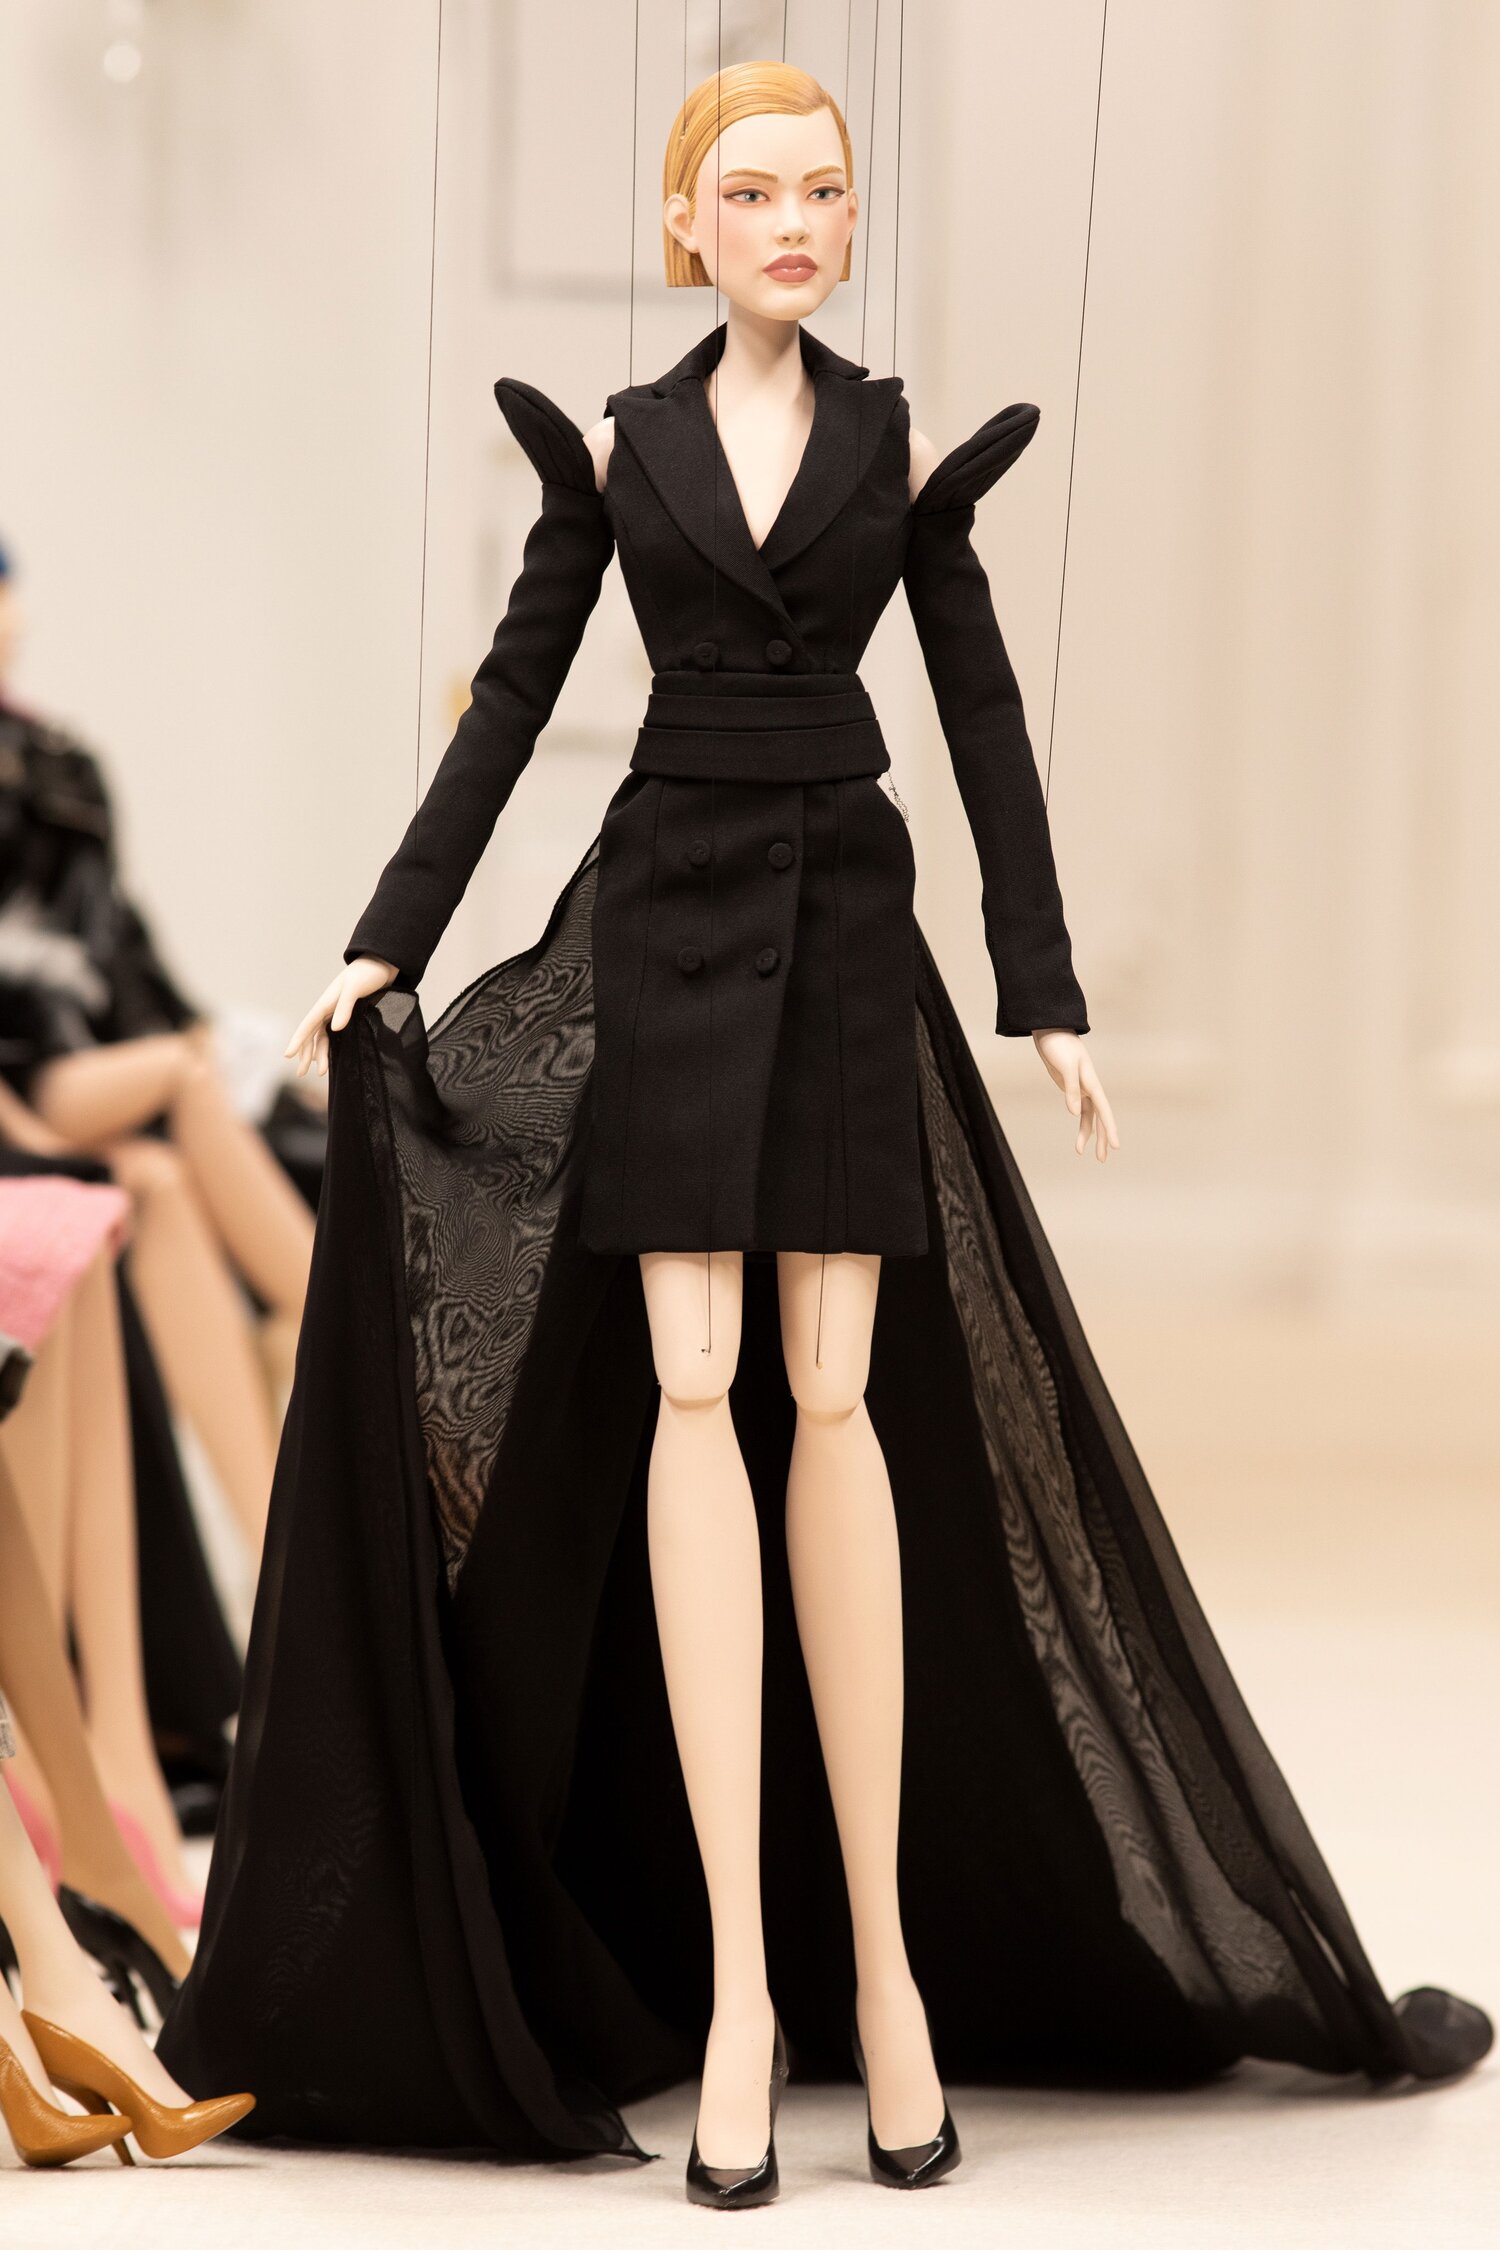 The Most Moschino Barbie Ever!, In love with the outfit and…